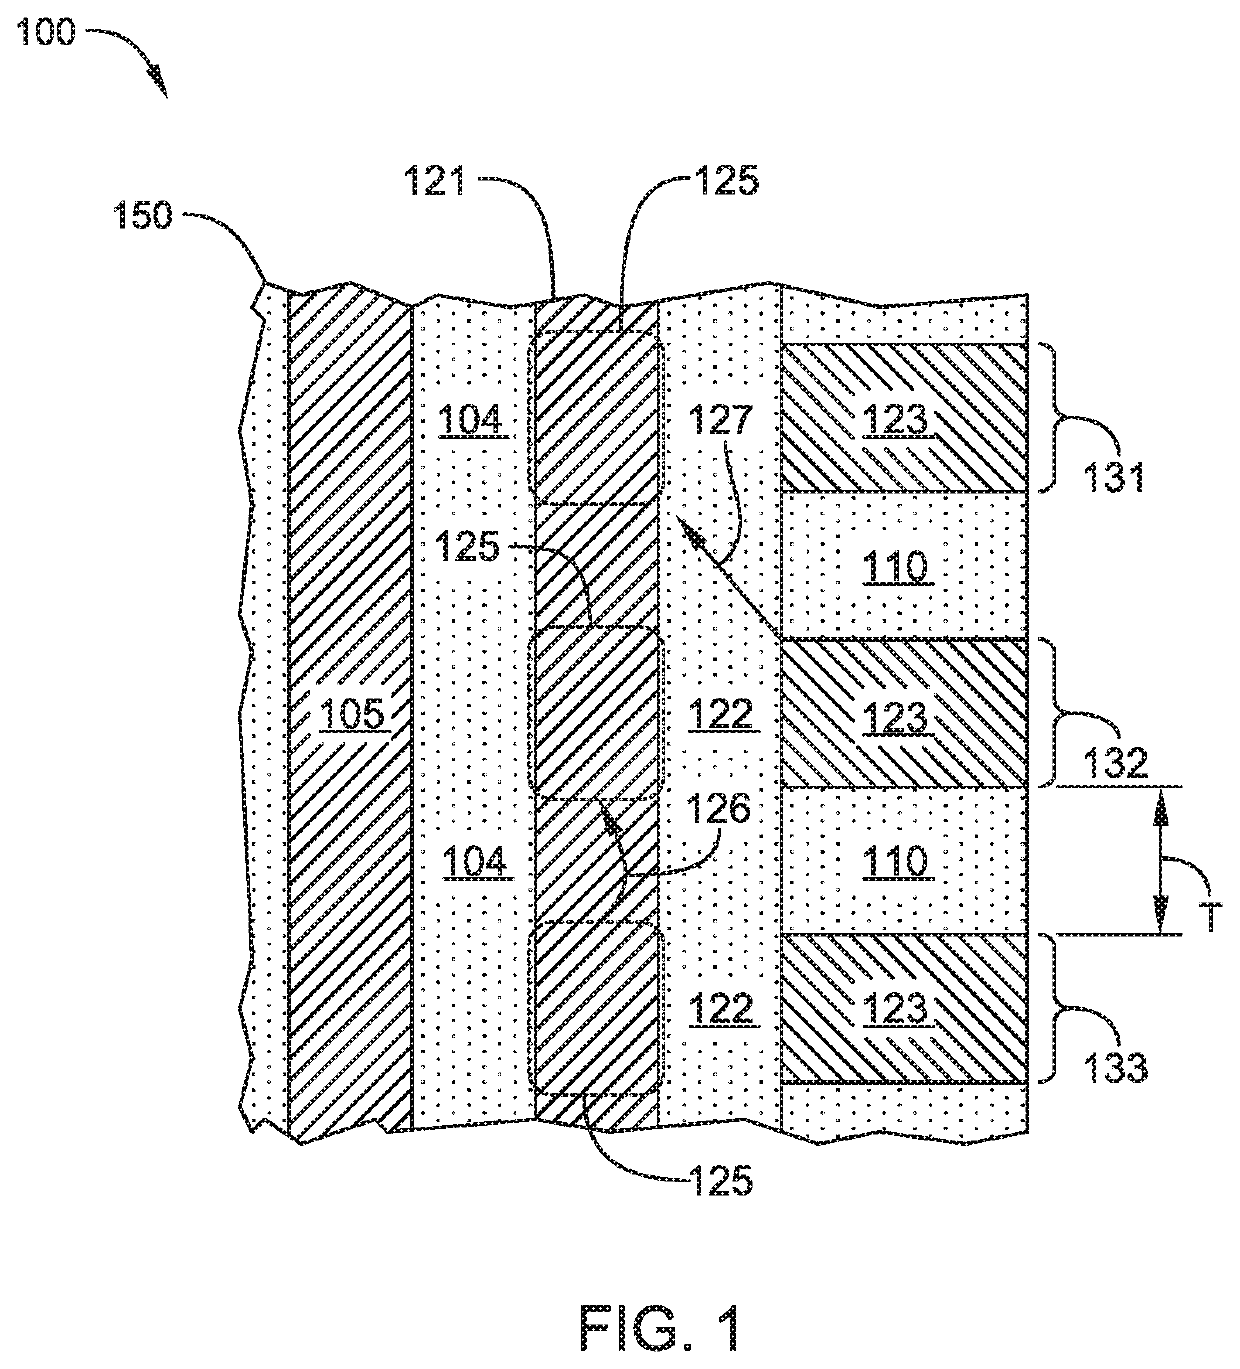 Multi-layer stacks for 3D NAND extendibility